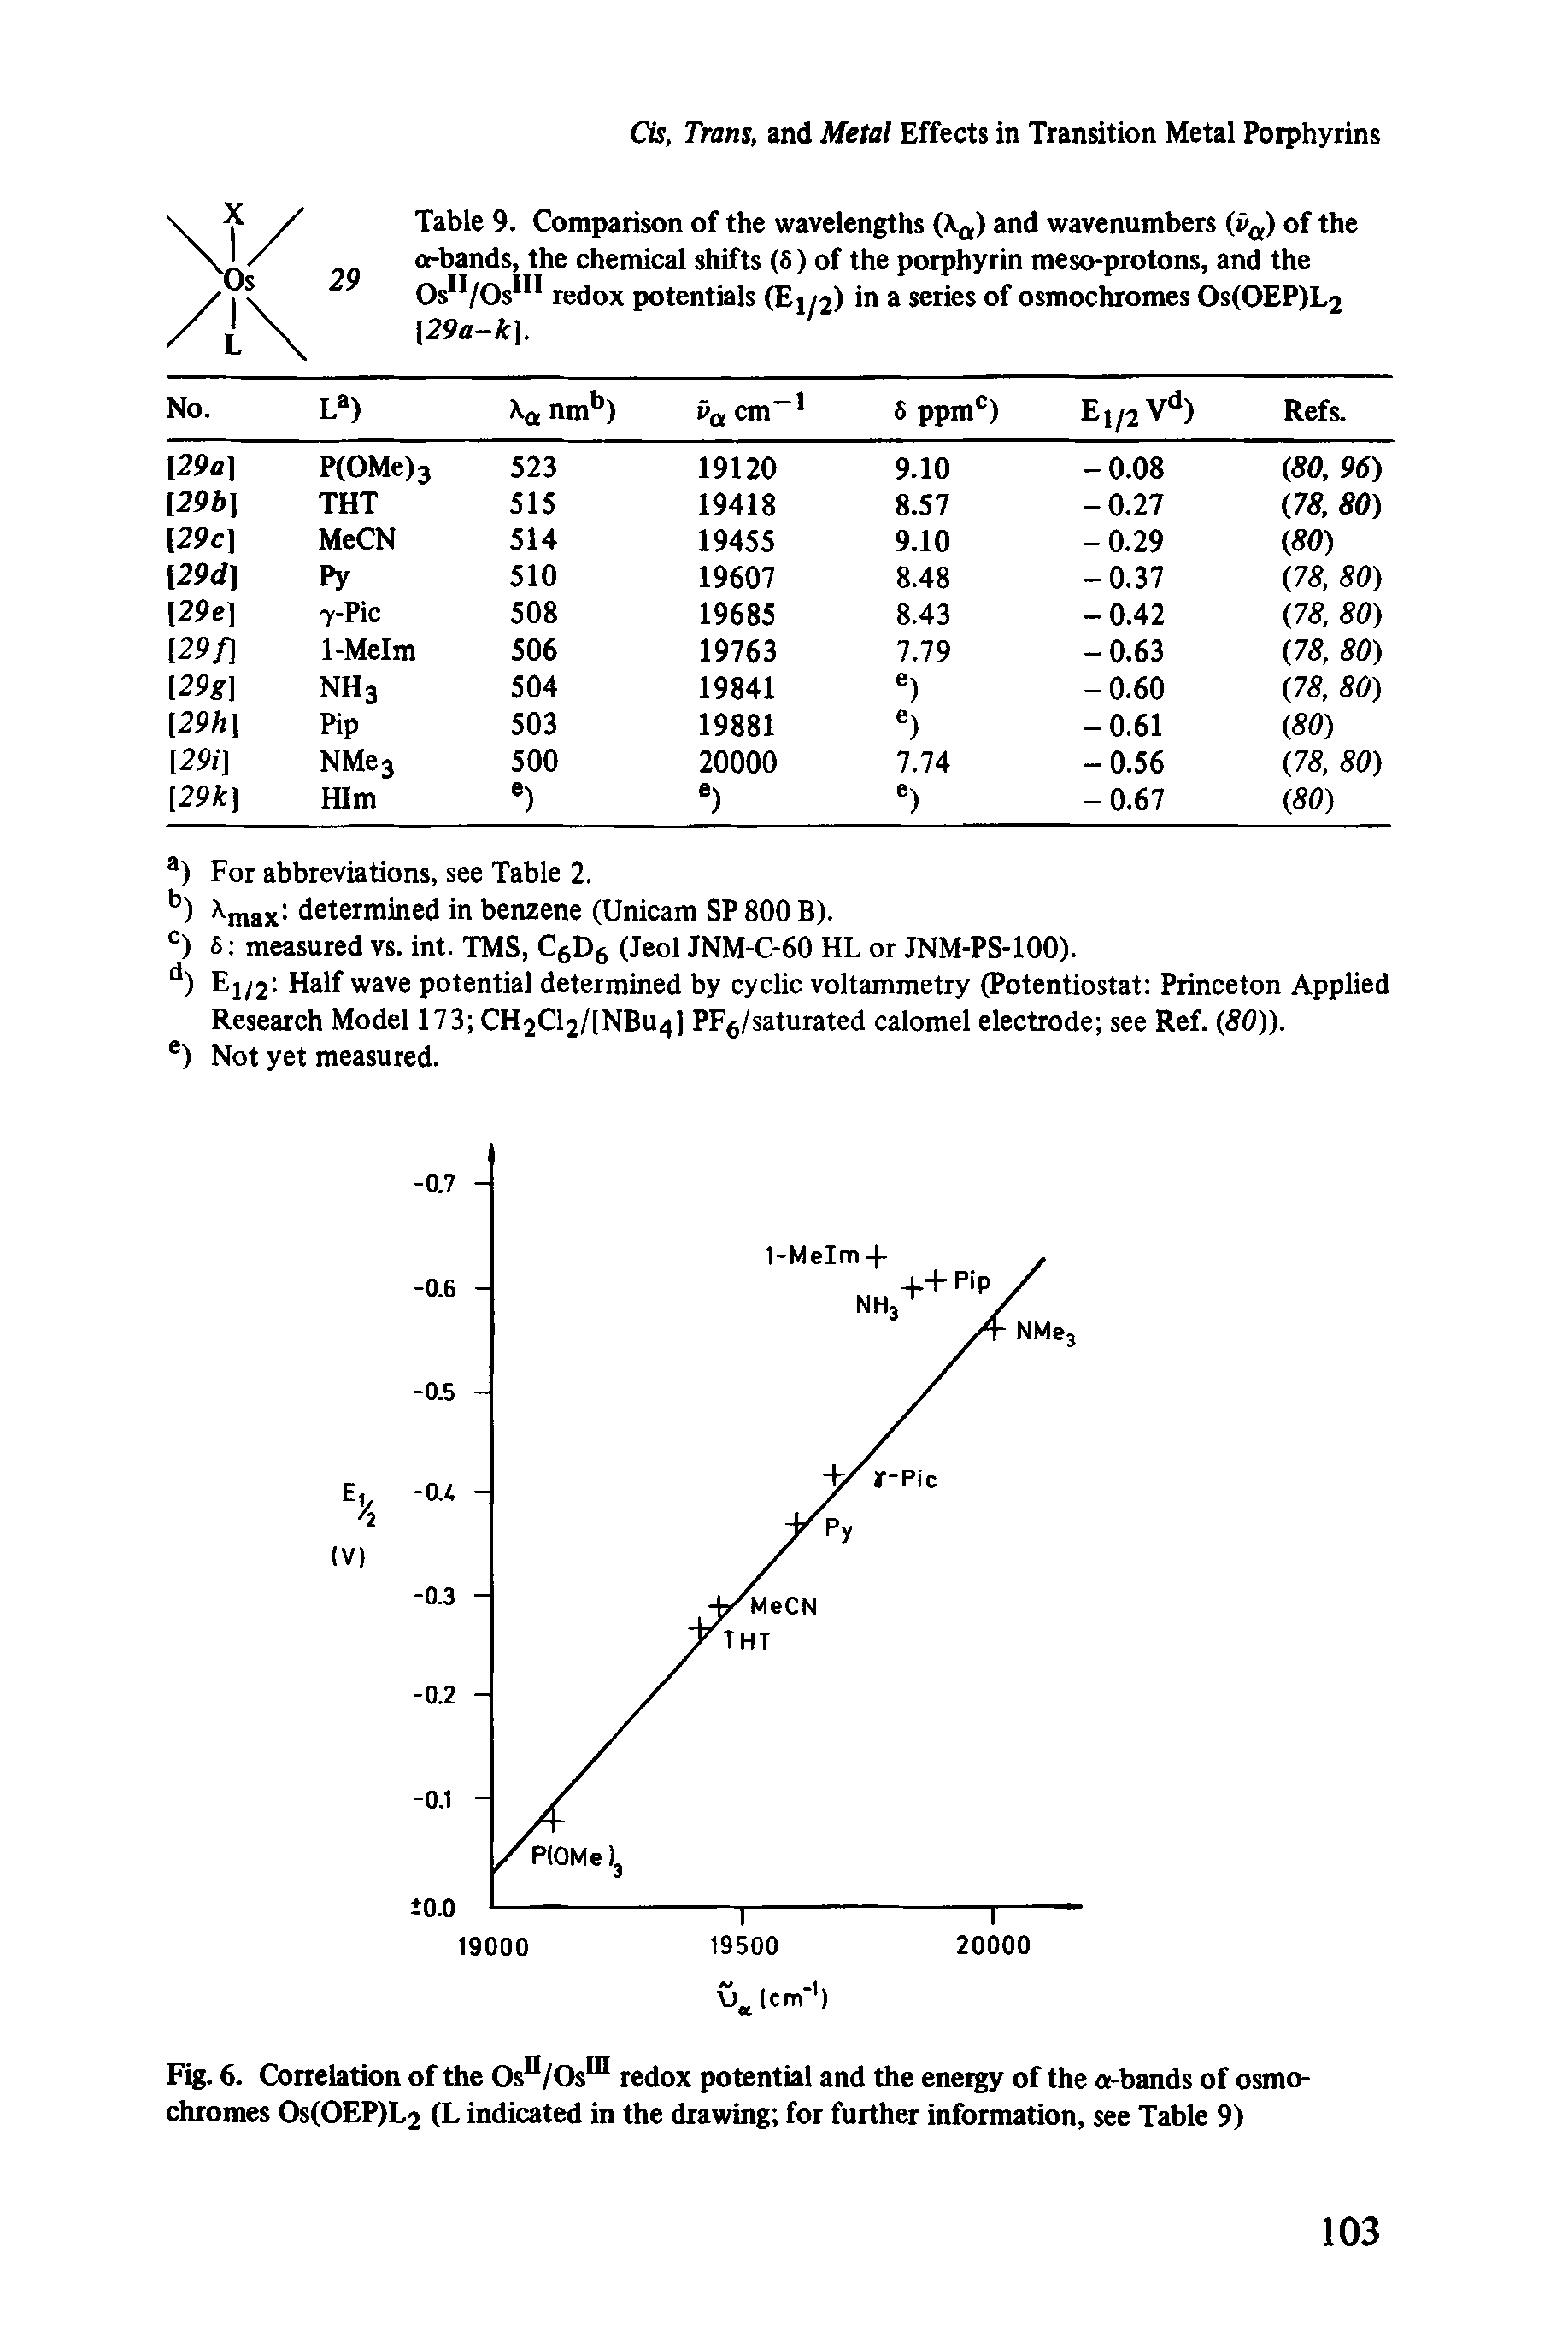 Table 9. Comparison of the wavelengths (A.a) and wavenumbers (va) of the or-bands, the chemical shifts (8) of the porphyrin meso-protons, and the Os /Os111 redox potentials (E1/2) in a series of osmochromes Os(OEP)L2 ]29a-k).